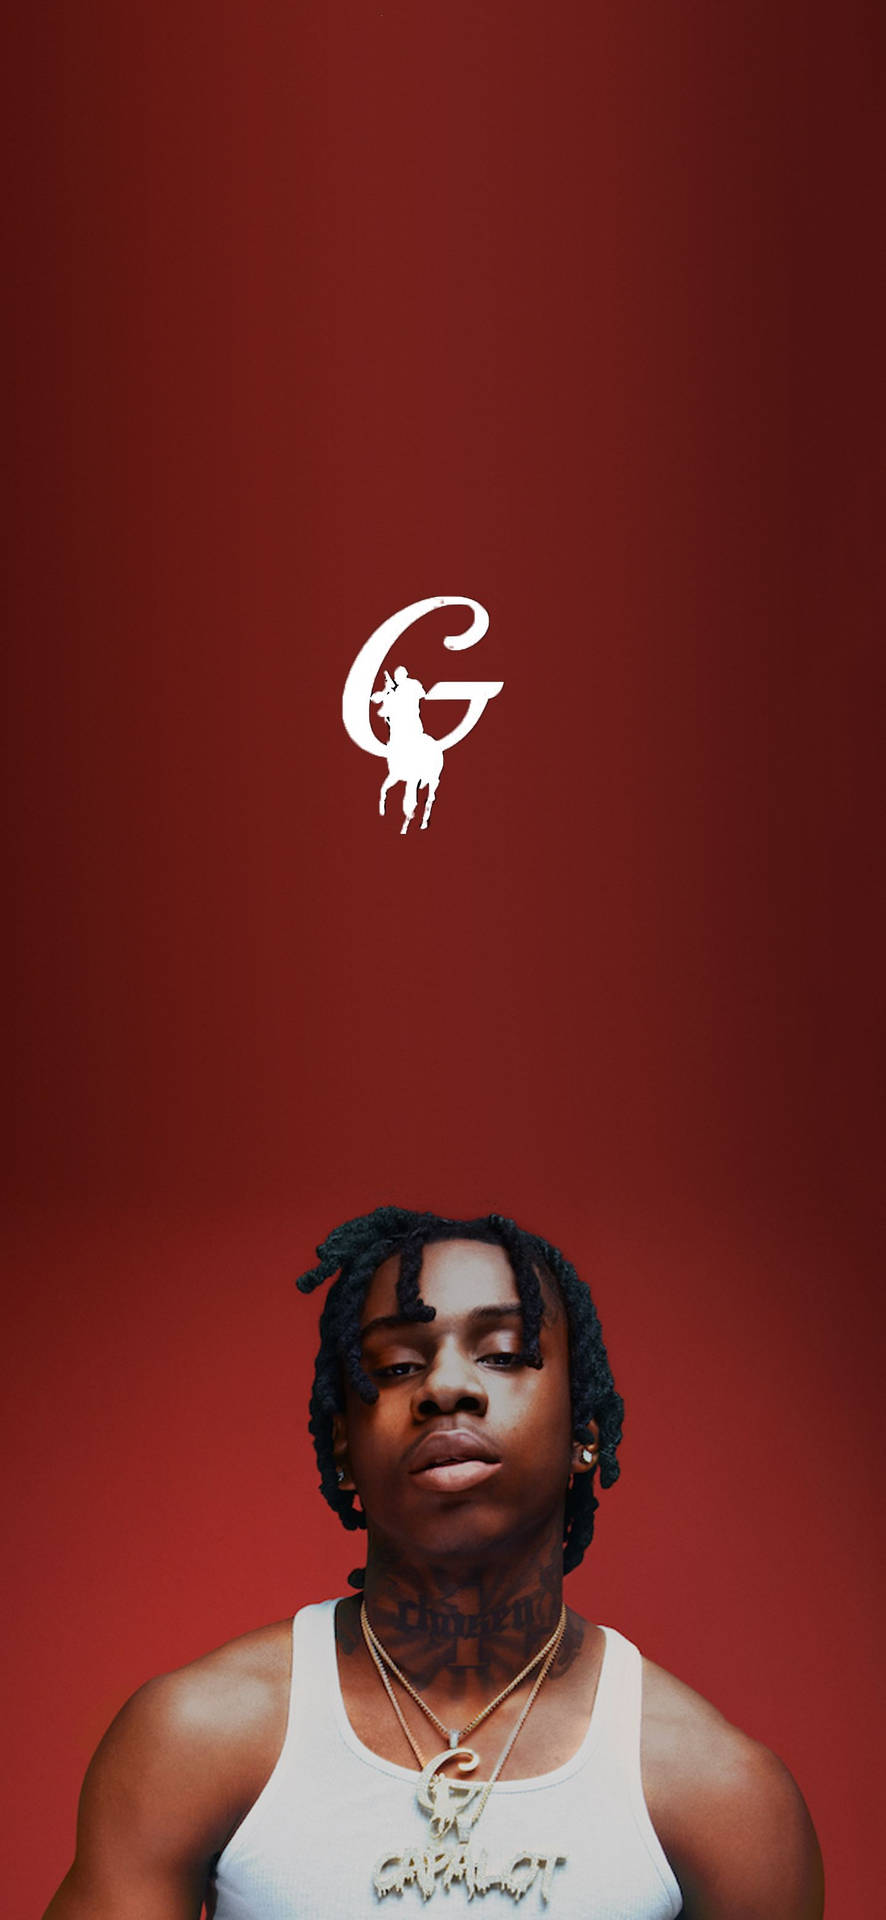 Polo G Red Aesthetic Wallpaper